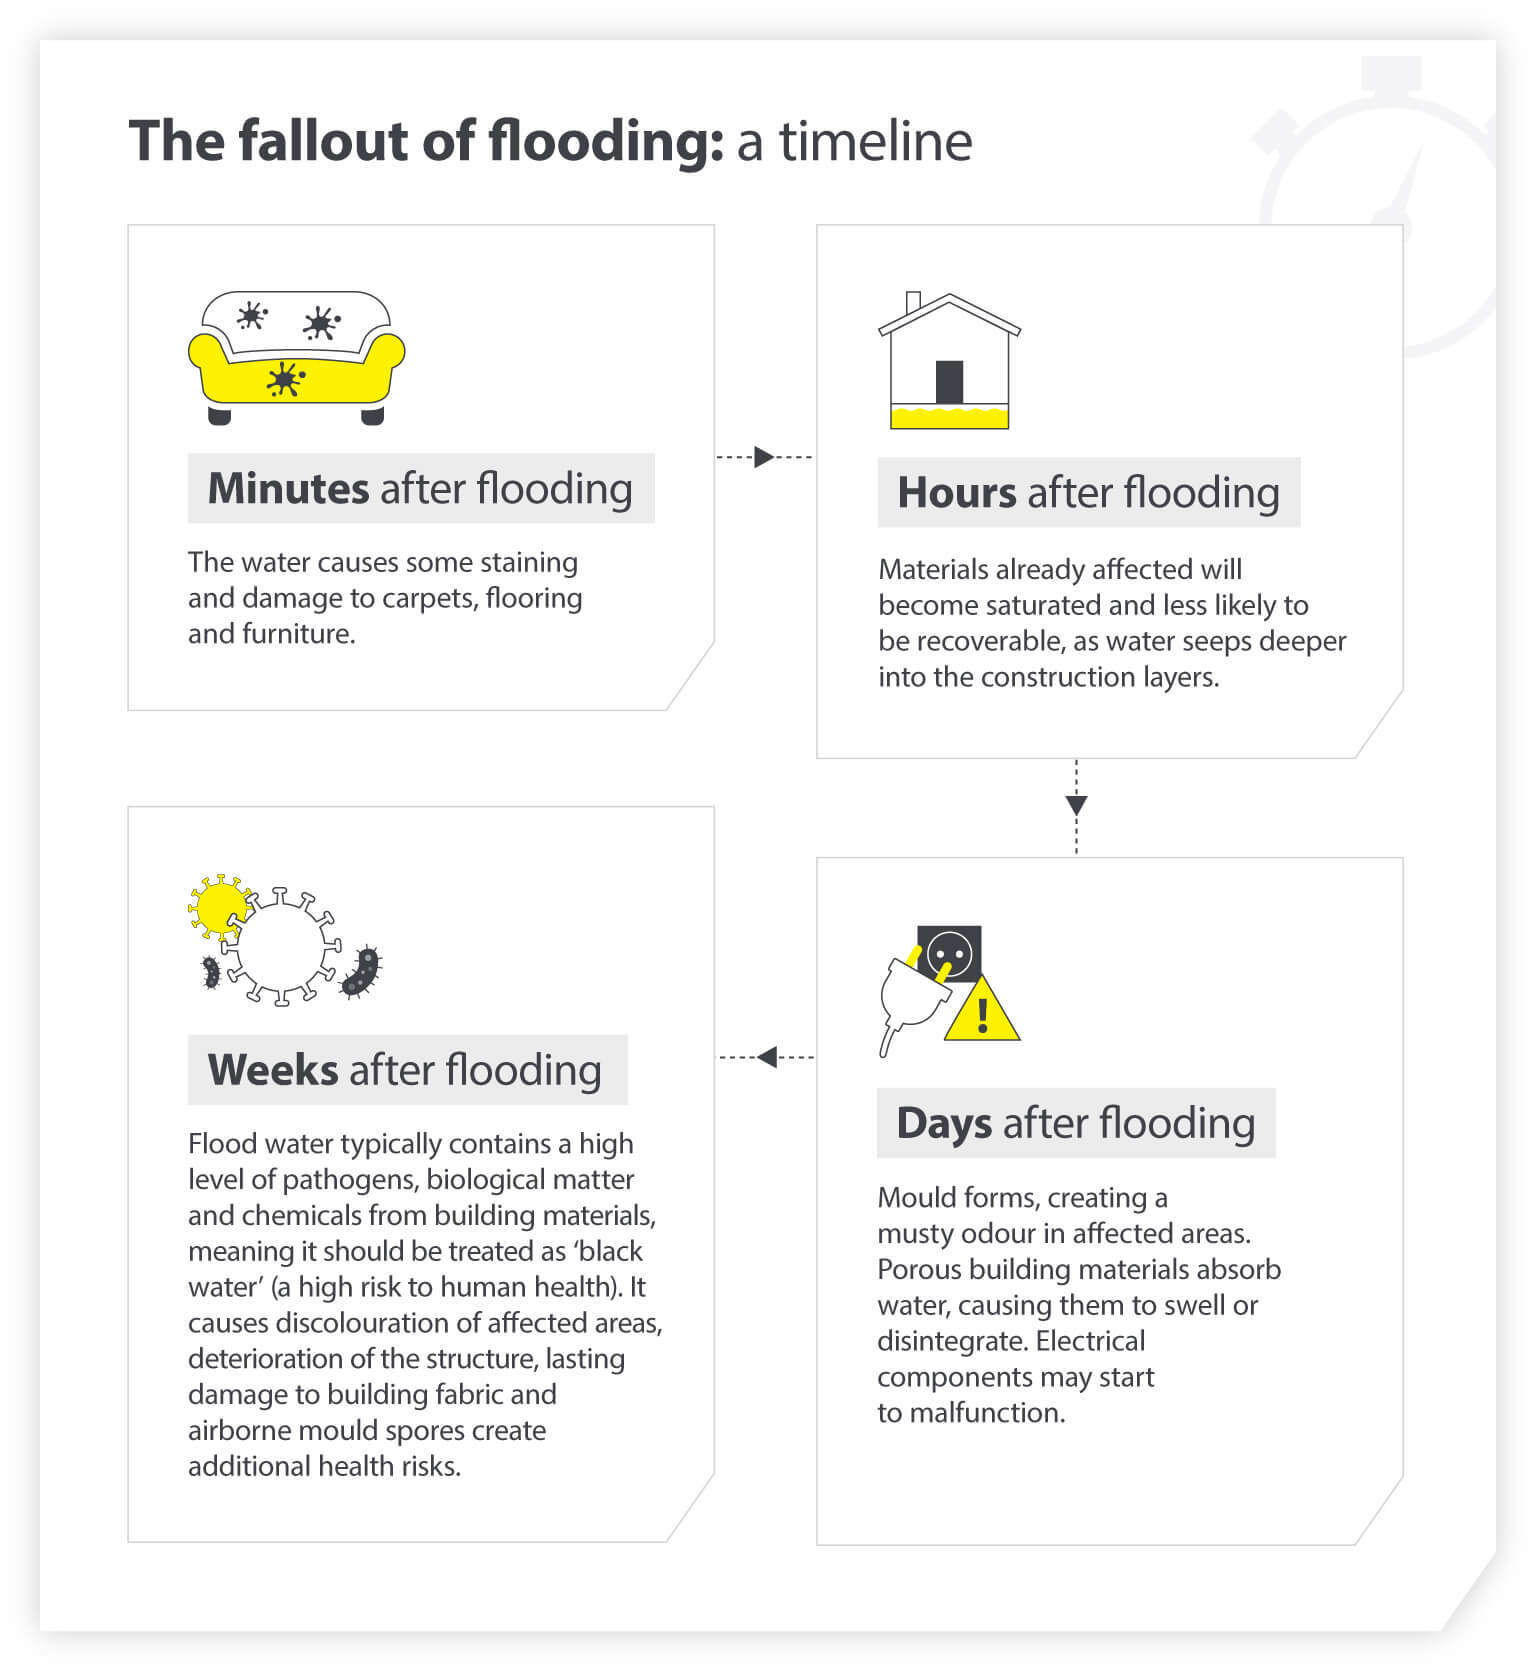 Fallout of flooding timeline